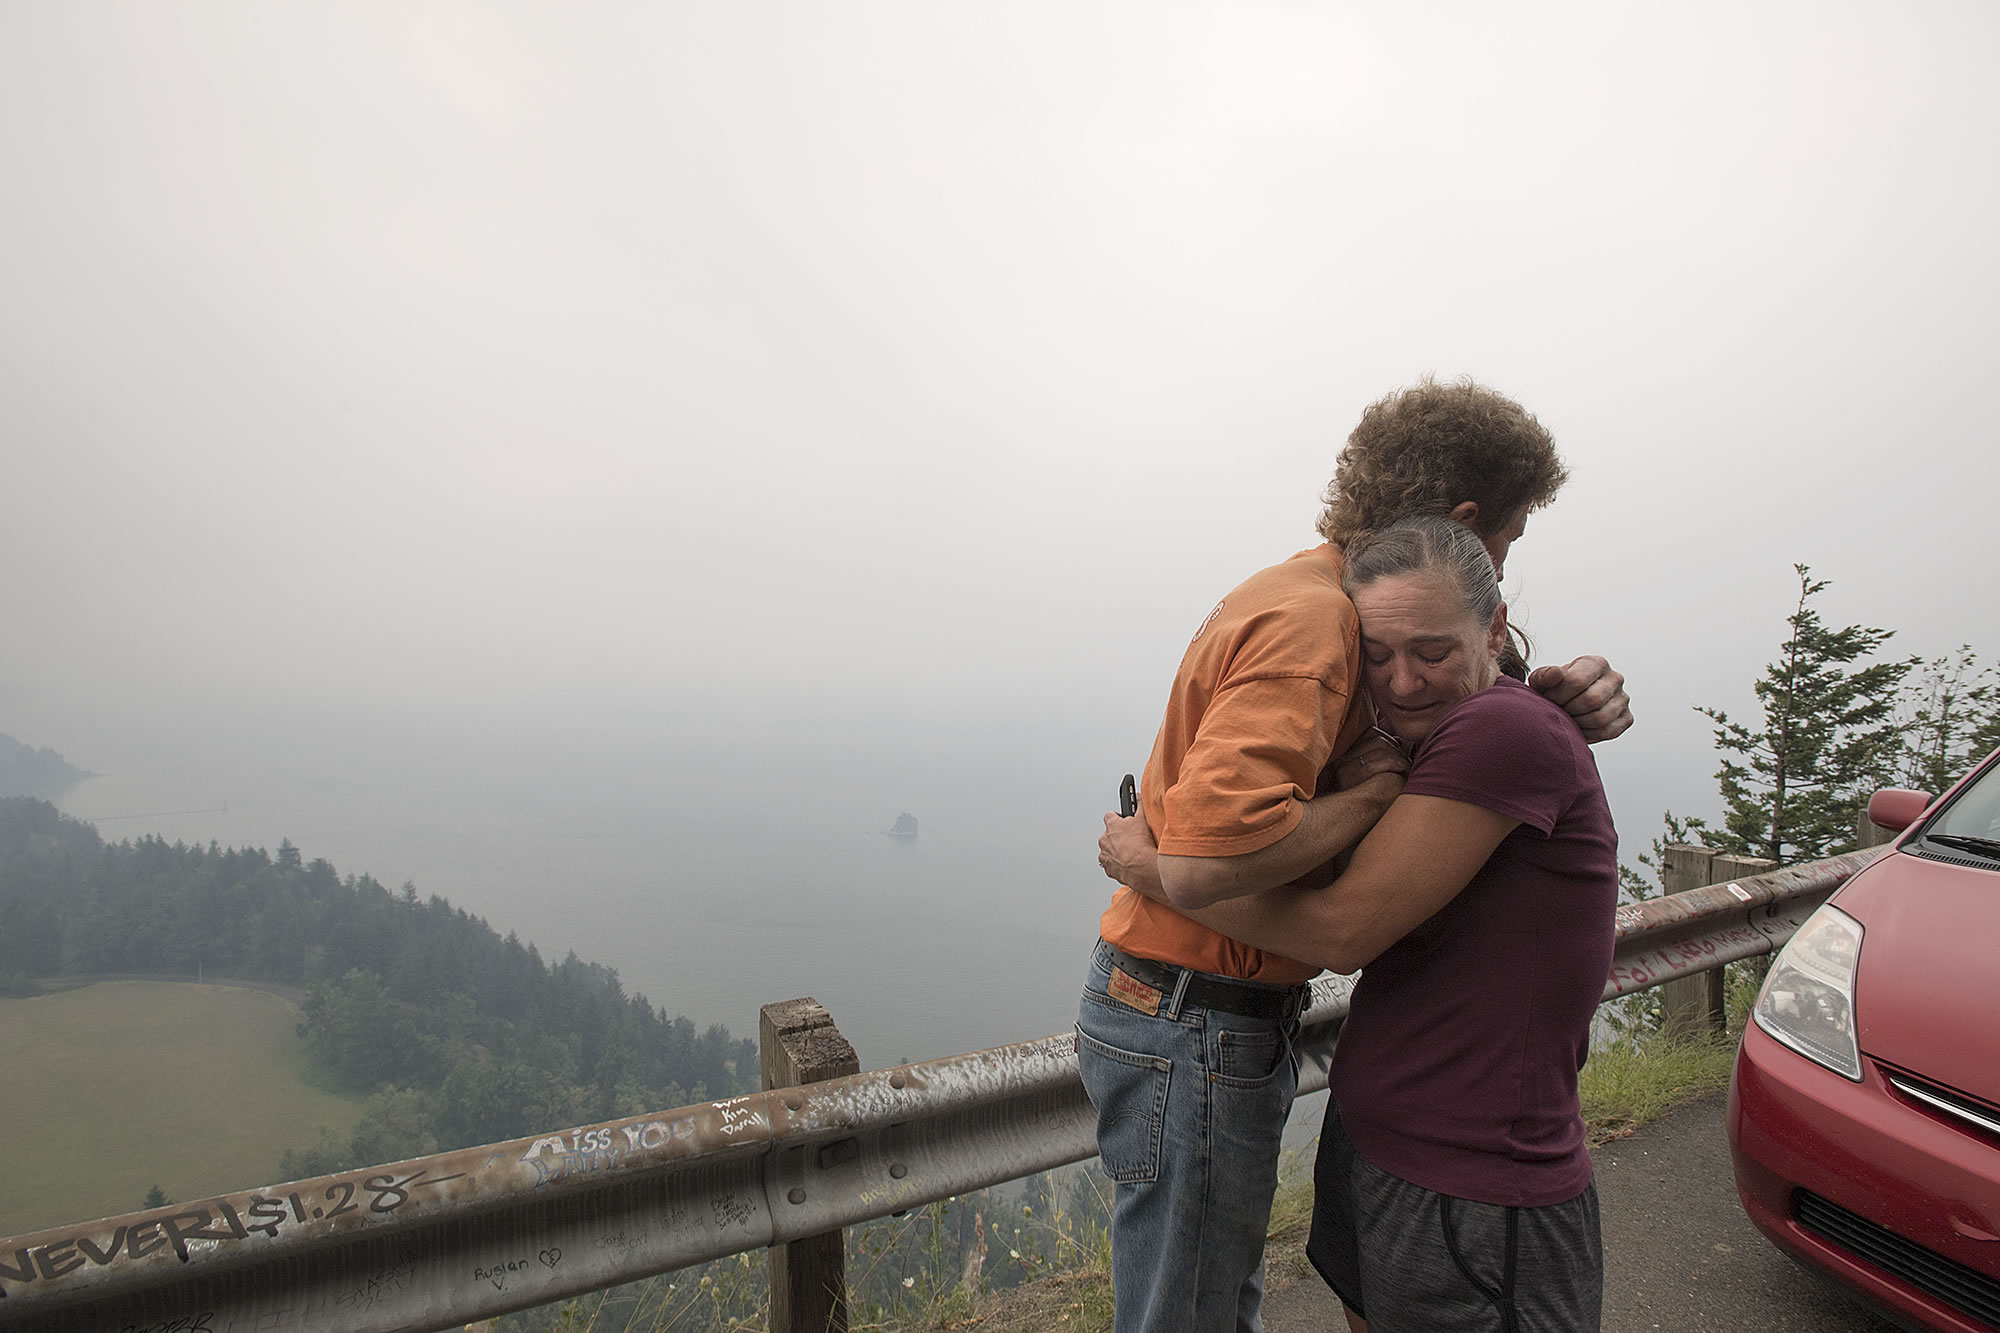 James Wilhelm, left, of Stevenson pauses to comfort Sheri Bousquet of Vancouver at the Cape Horn overlook along Highway 14 as she fights back tears watching the Columbia River Gorge burn from wildfires Tuesday morning, Sept. 5, 2017. She called the area her "sanctuary" and said she visits often because of the beauty. "It's like my church," she said.